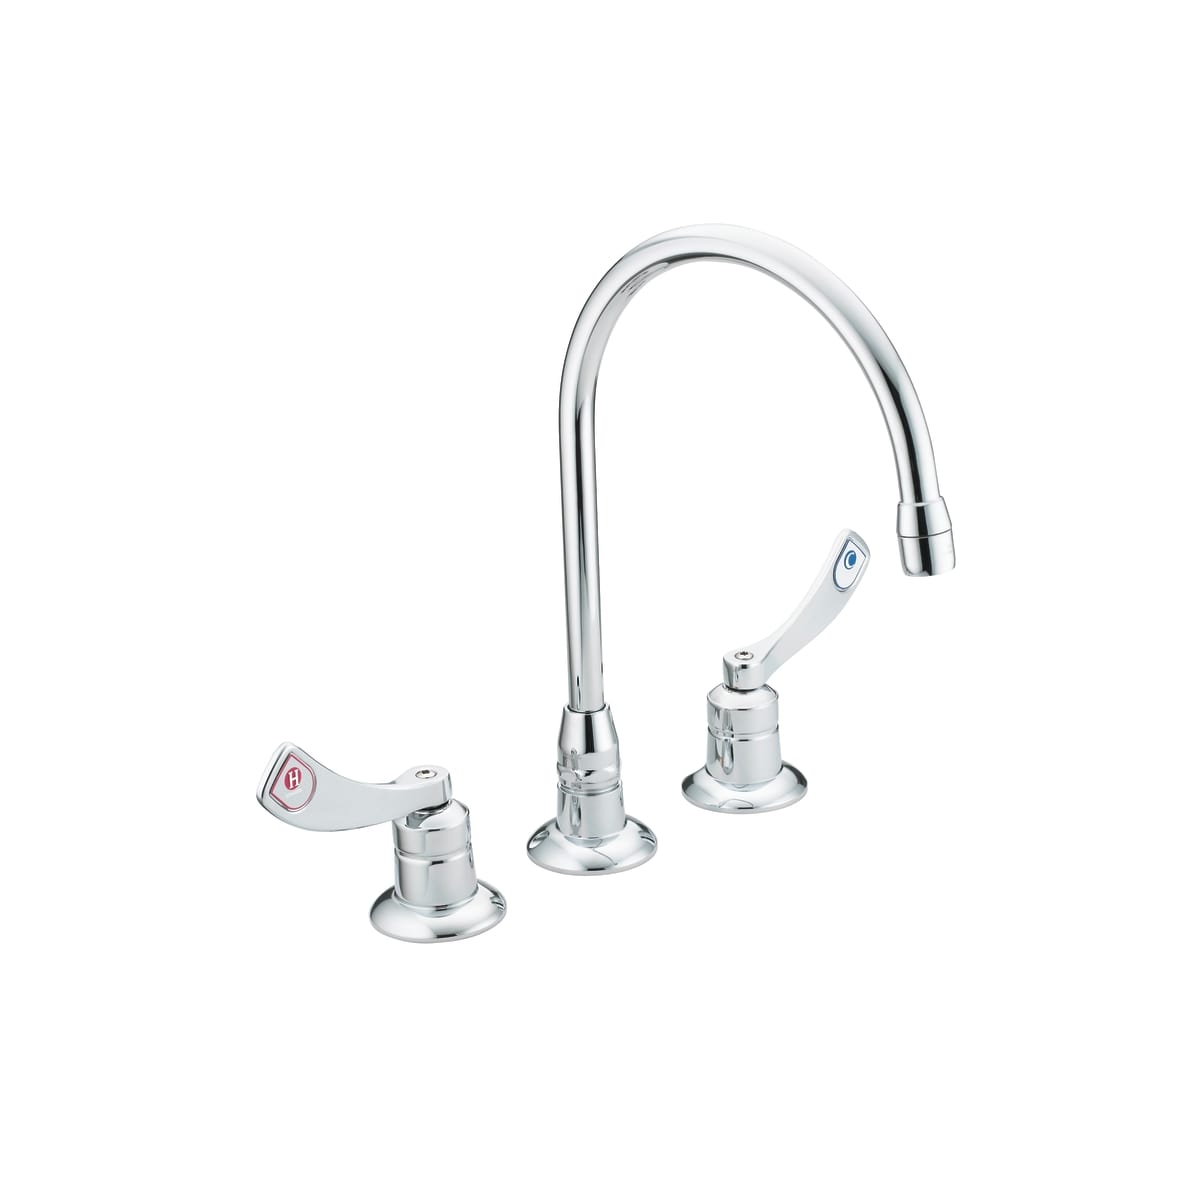 MOEN 8225 M-DURA BAR/PANTRY FAUCET WITH HANDLE TEMPERATURE INDICATOR DECALS